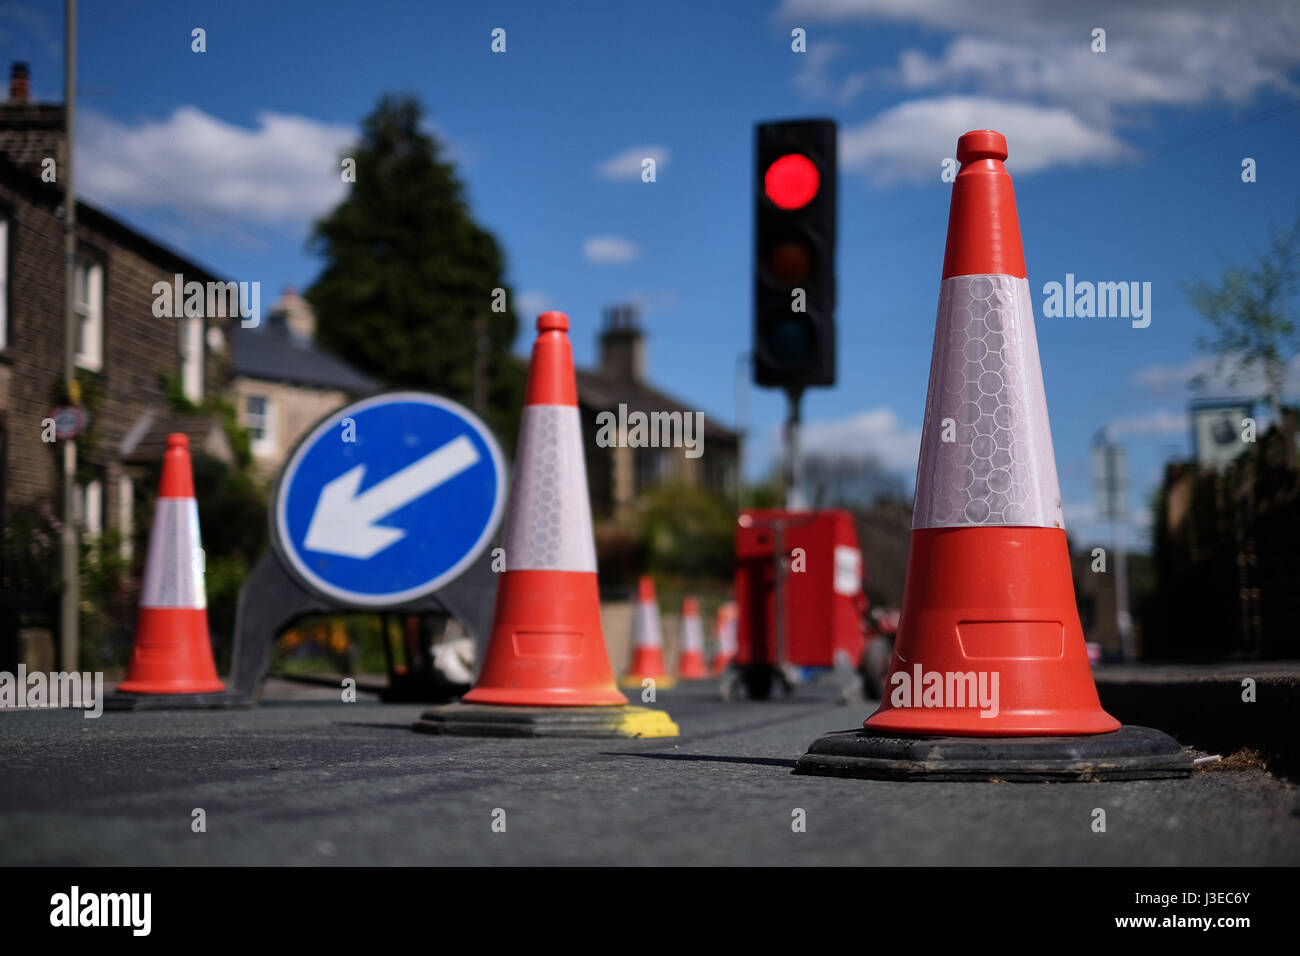 Traffic cones and lights at roadworks Stock Photo